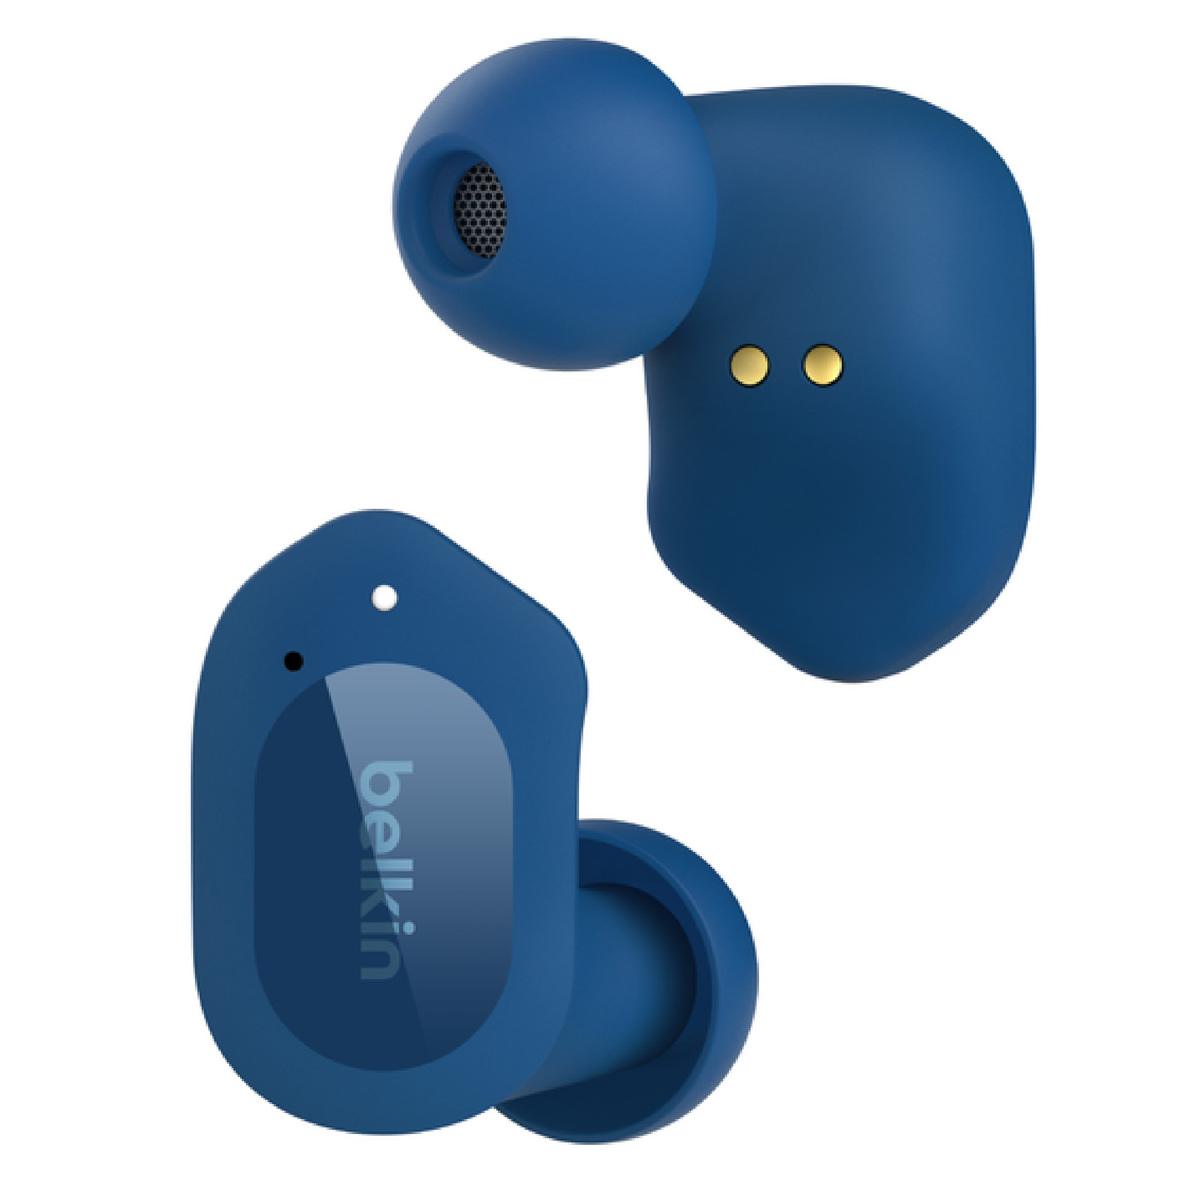 Belkin SOUNDFORM (TWS-C005)True Wireless Earbuds (Bluetooth Headphones with  Noise Isolation, Touch Controls, 24 Hours Playtime, Sweatproof) Wireless  Headphones, Bluetooth Earbuds,Blue Online at Best Price, Mobile Hands Free